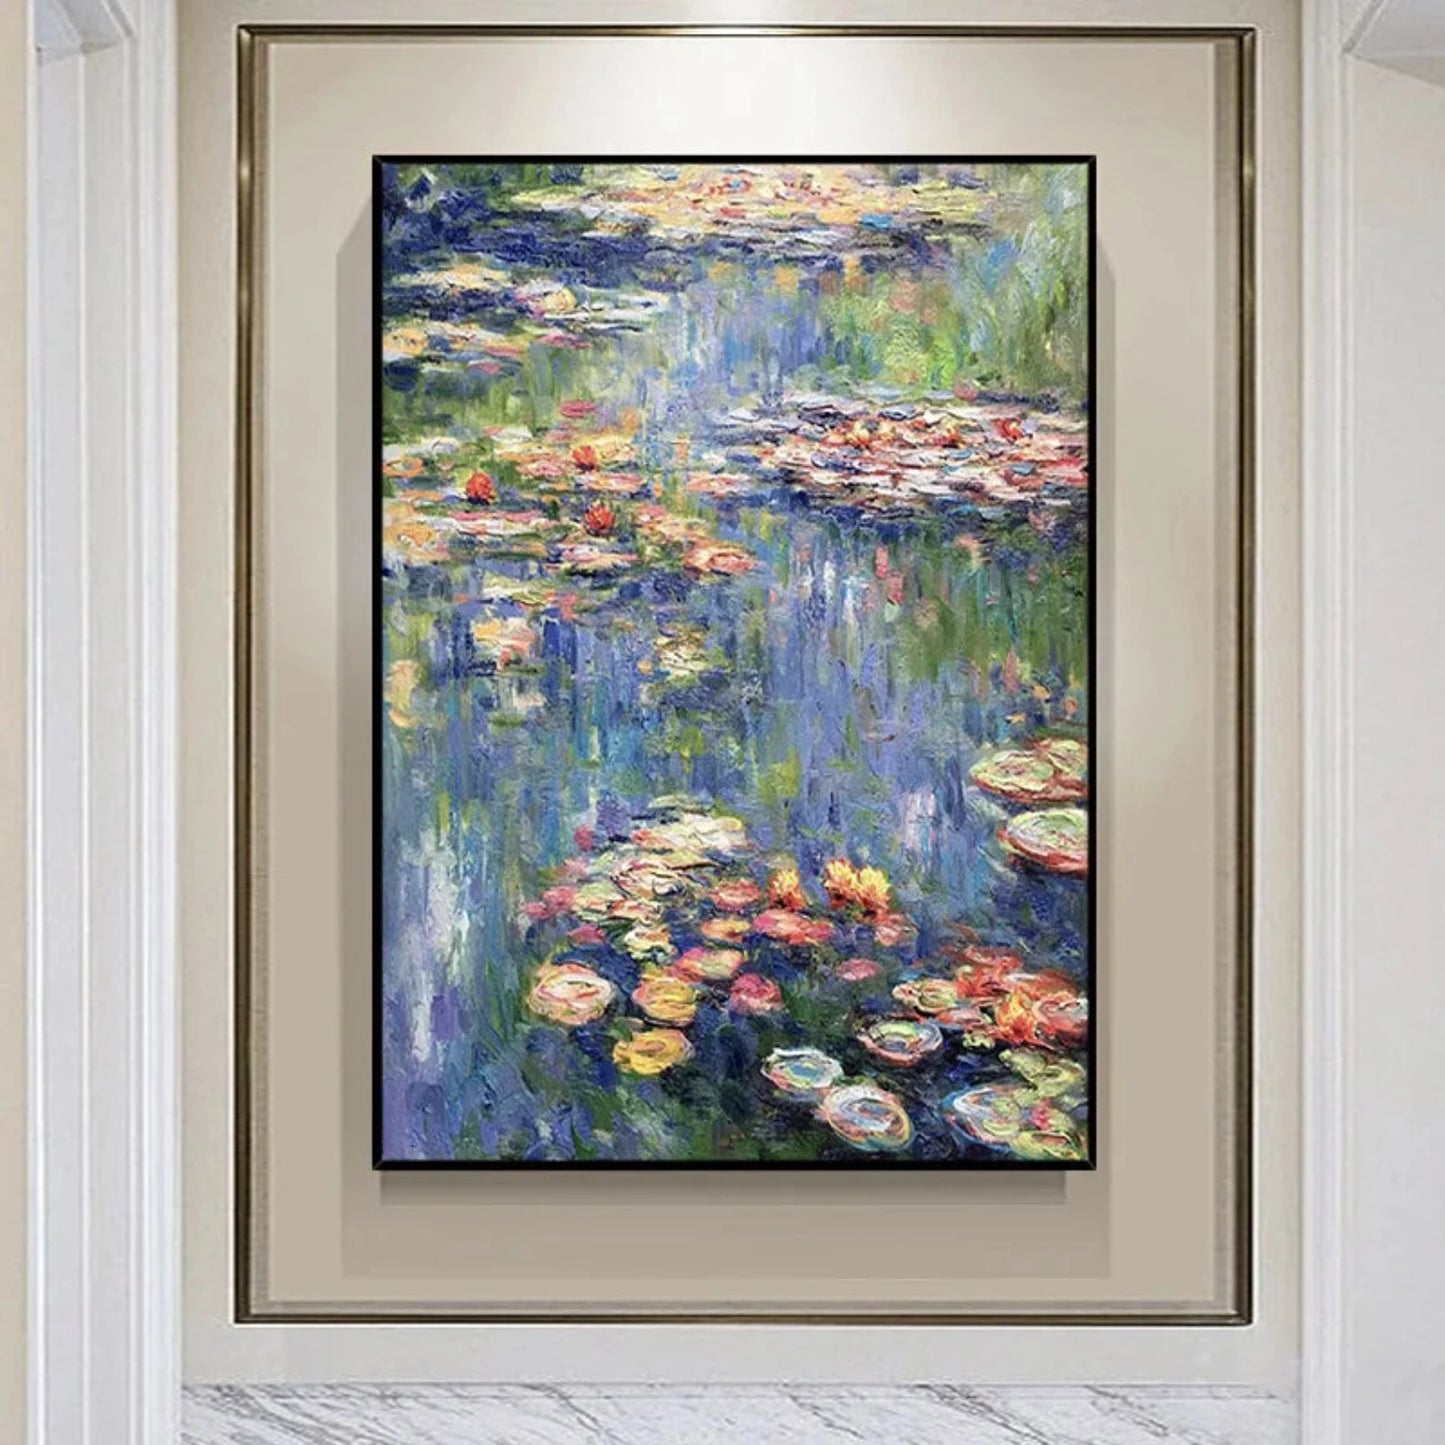 Abstract Flower Pond Textured Decorative Wall Art